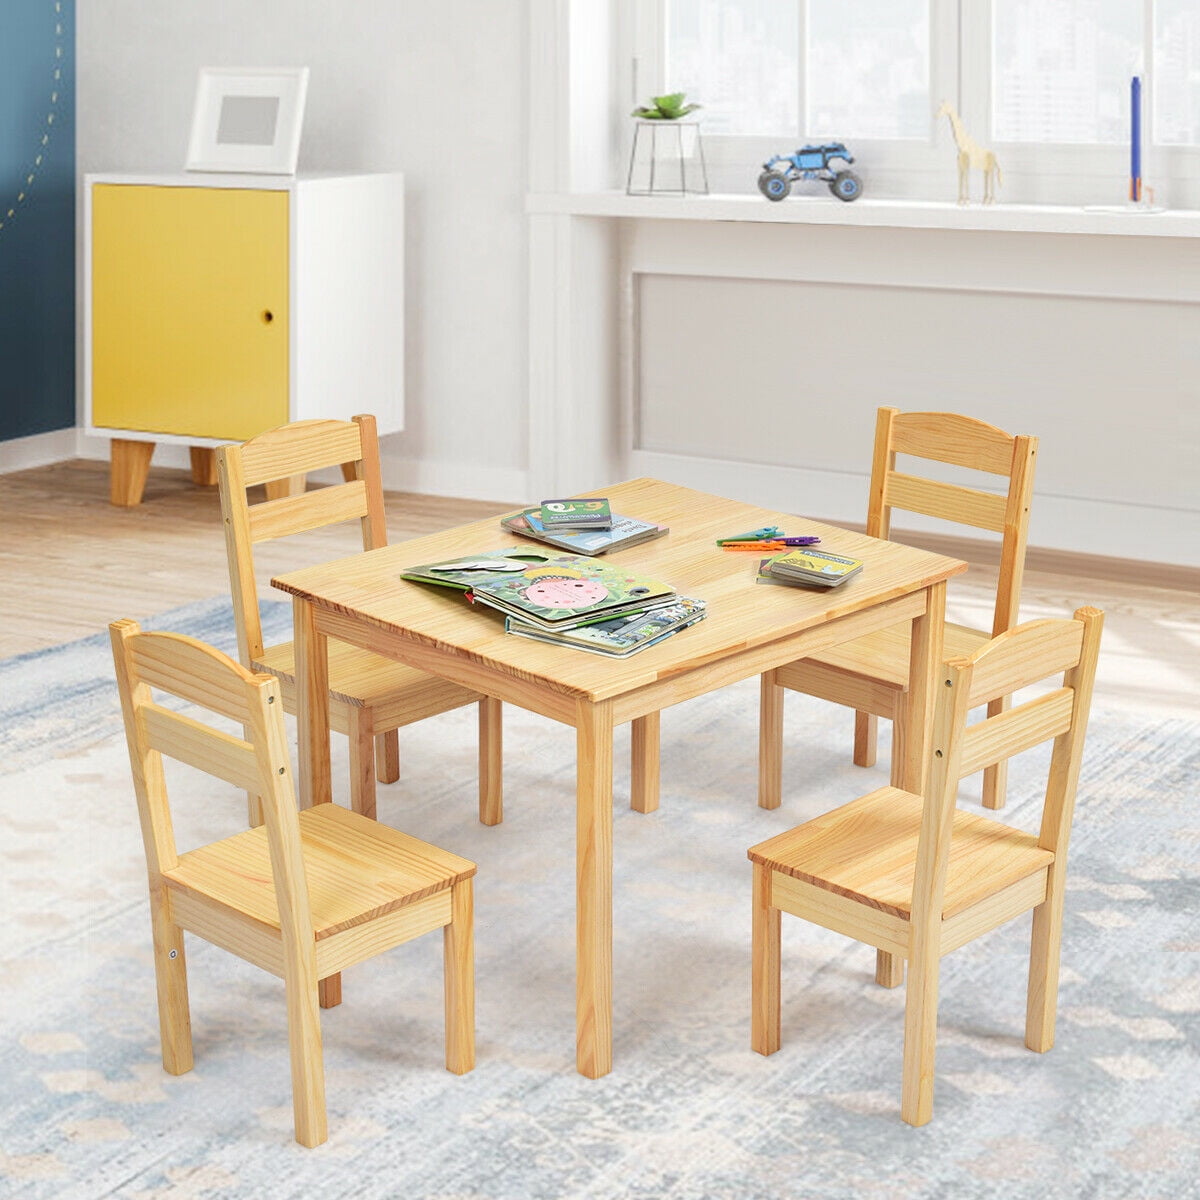 Walmart Canada Childrens Table And Chairs Buy Now, 18 OFF   aarav.co